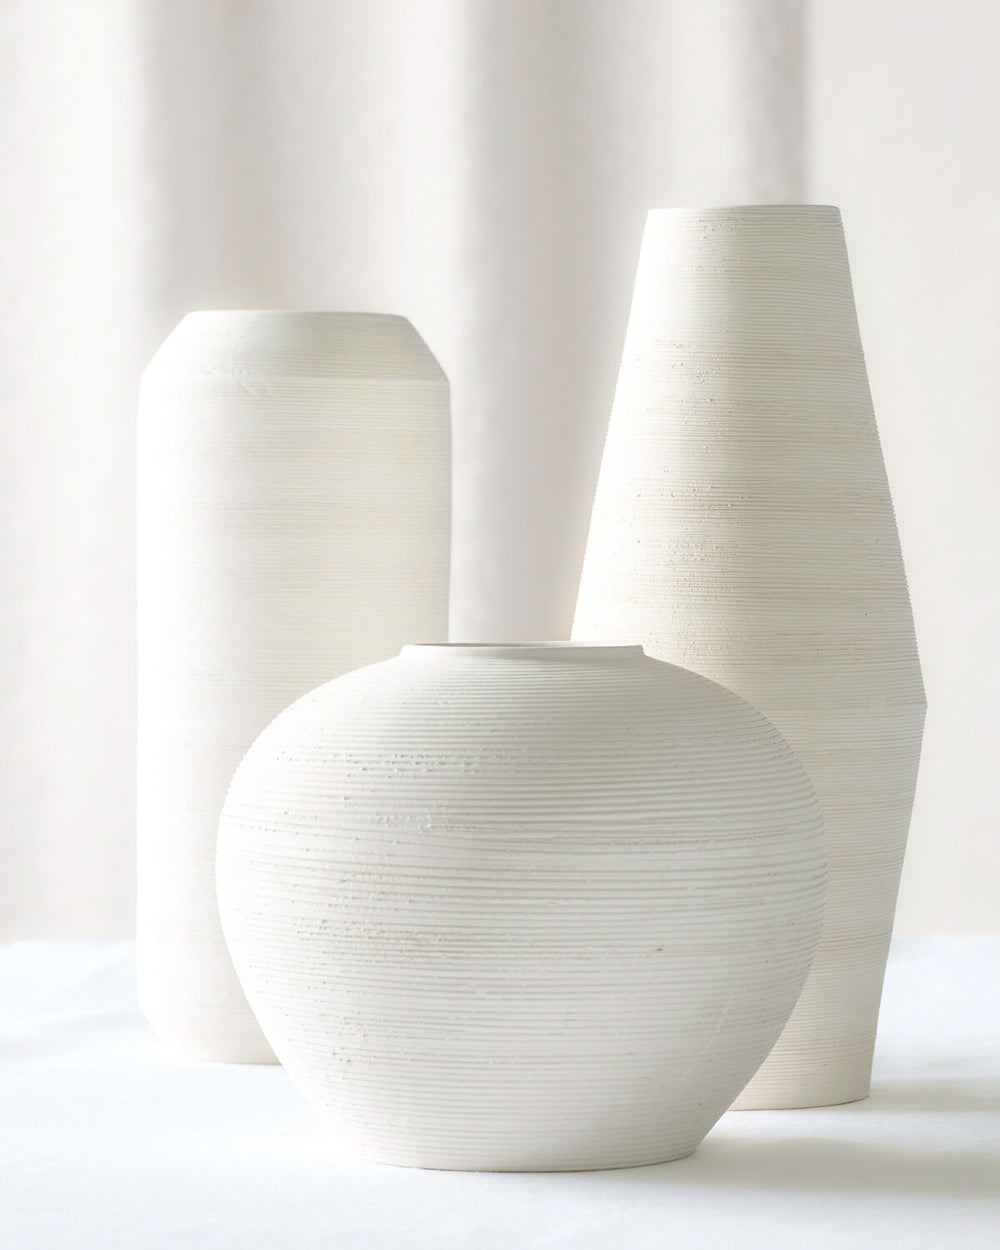 Zarina Vases in small, medium and large on white background. Part of Fairkind's Morocco Ceramic Collection.